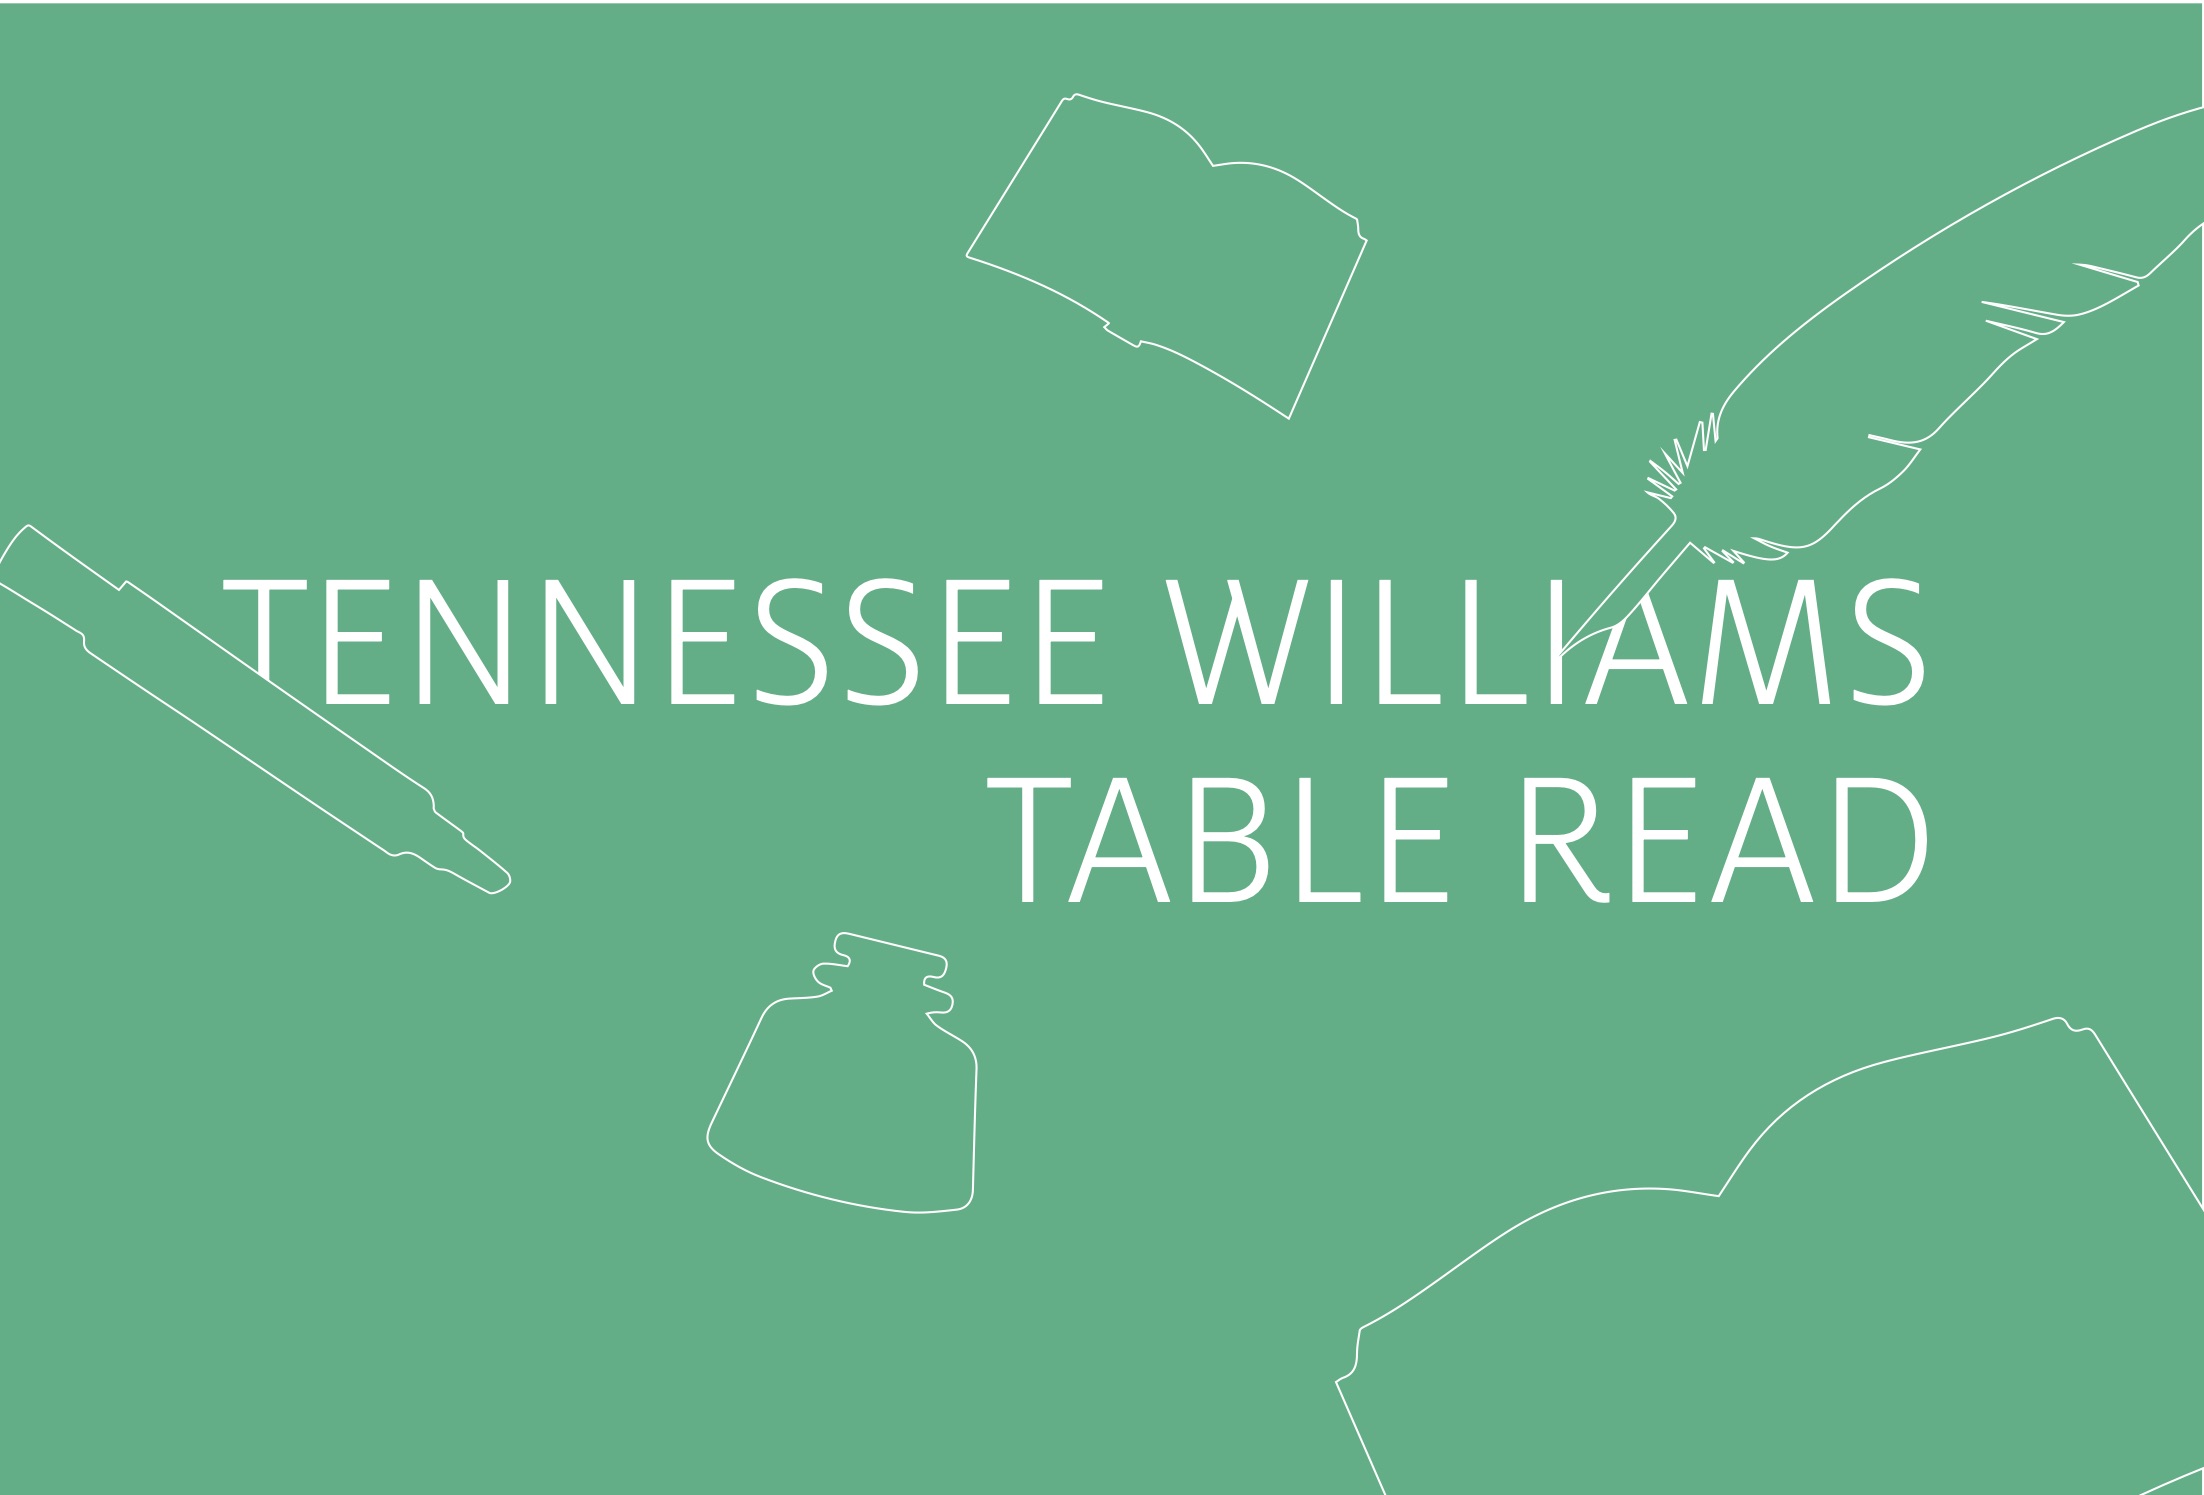 Tennessee Williams Table Read